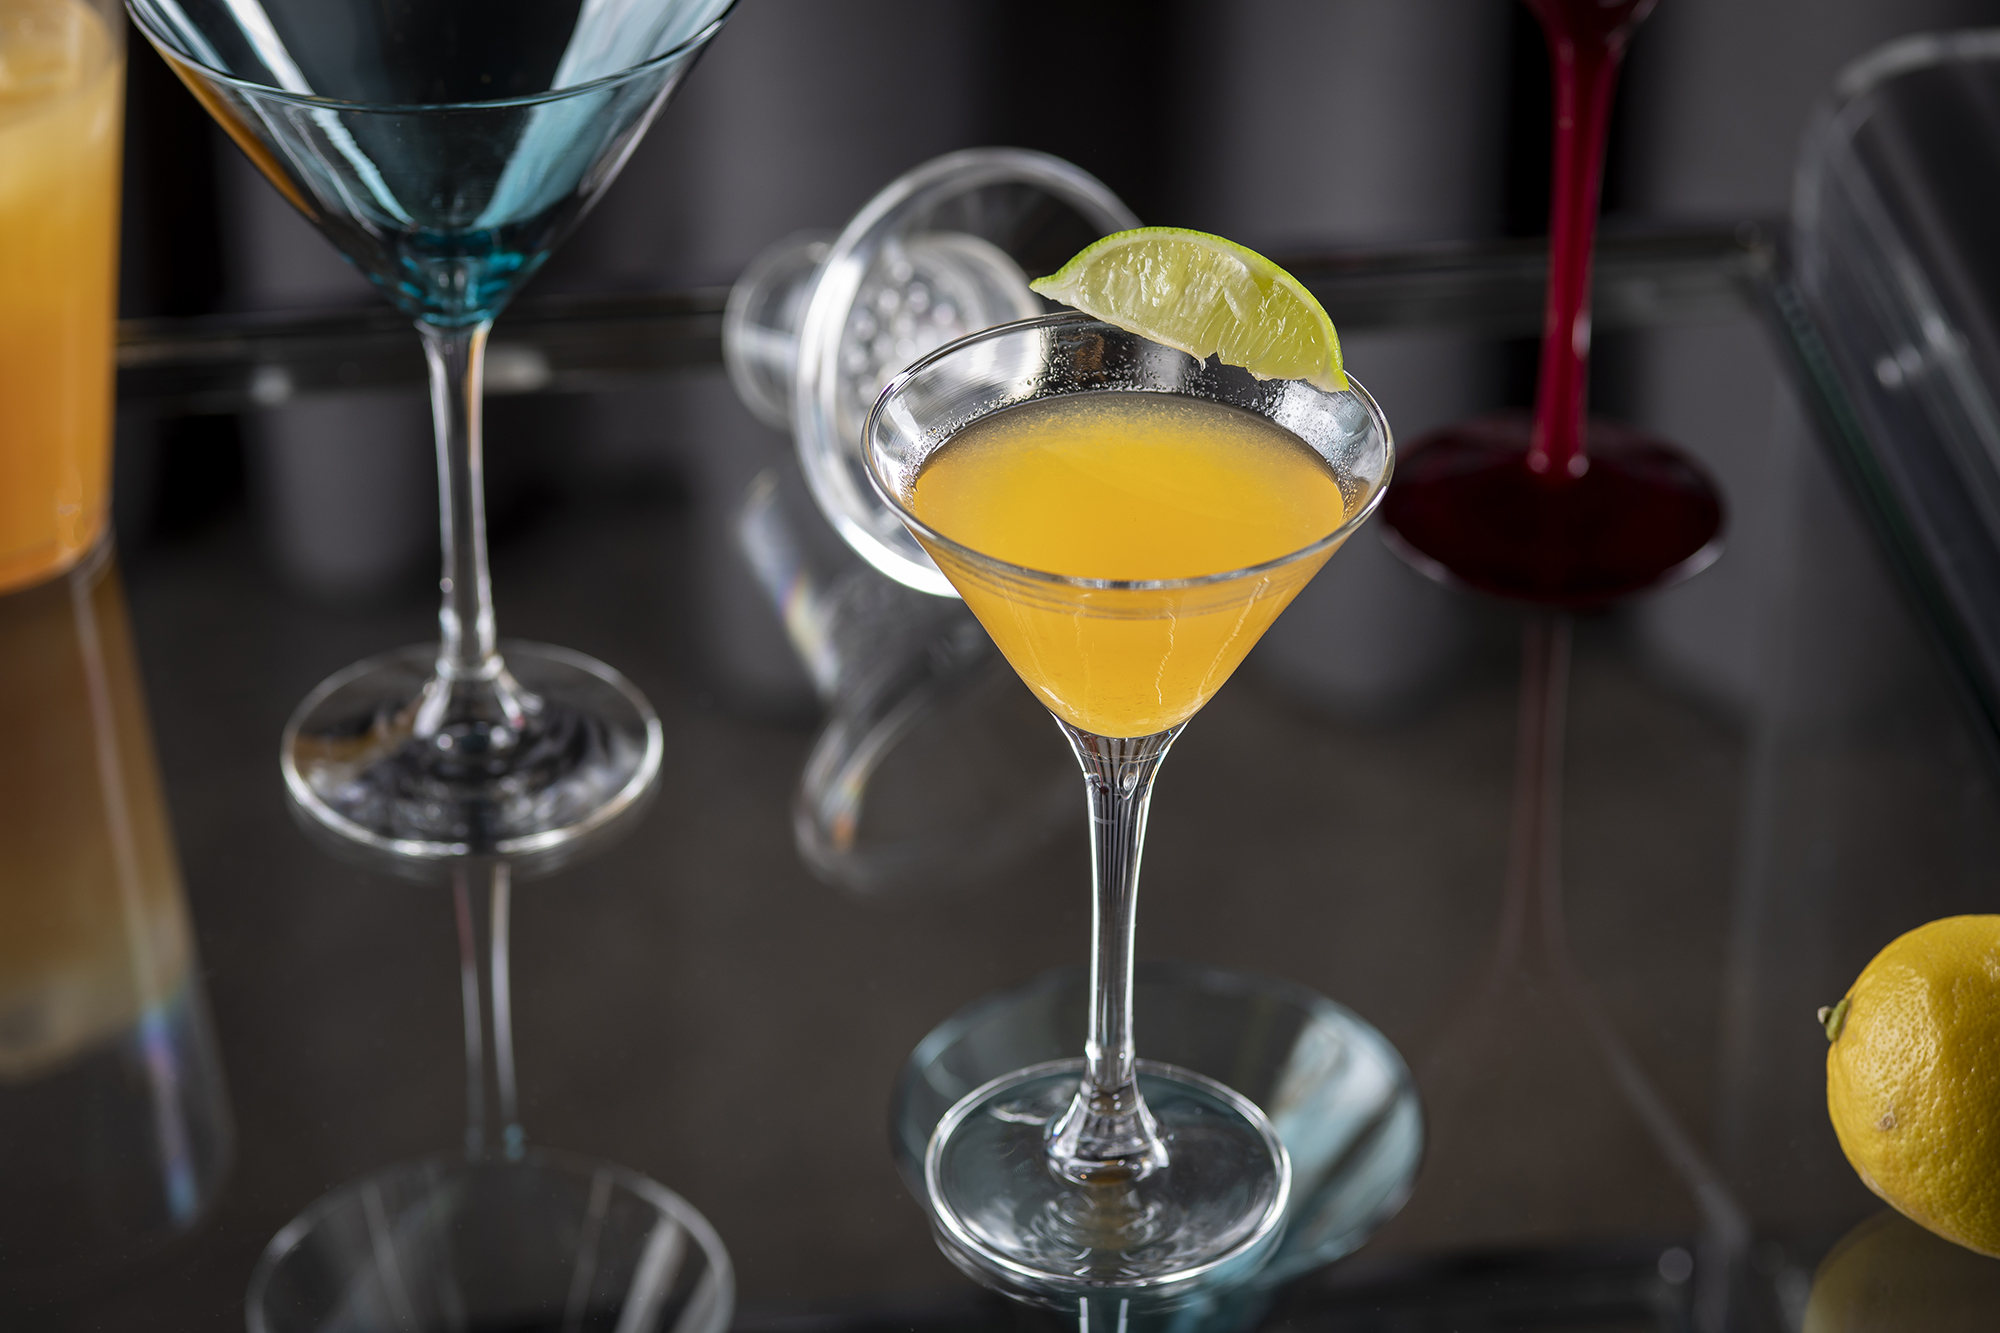 Bright yellow cocktail in a martini glass with a lime wedge garnish